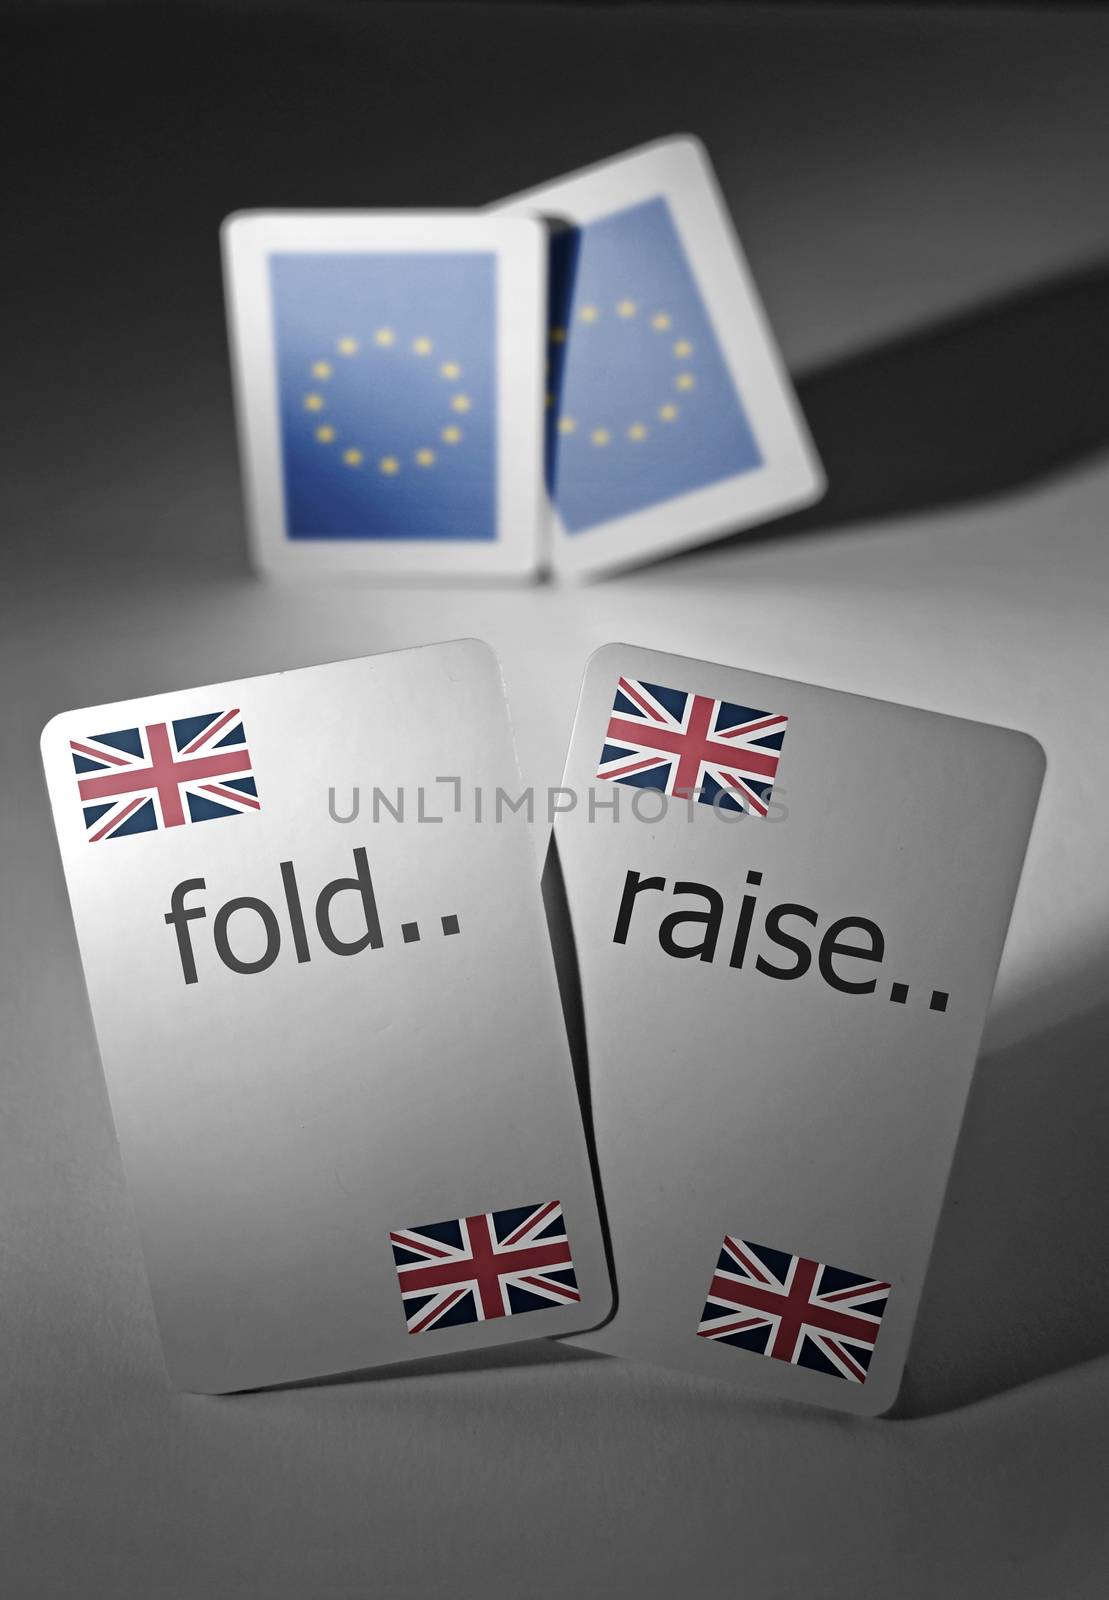 Playing cards marked with British flag and fold or raise choice